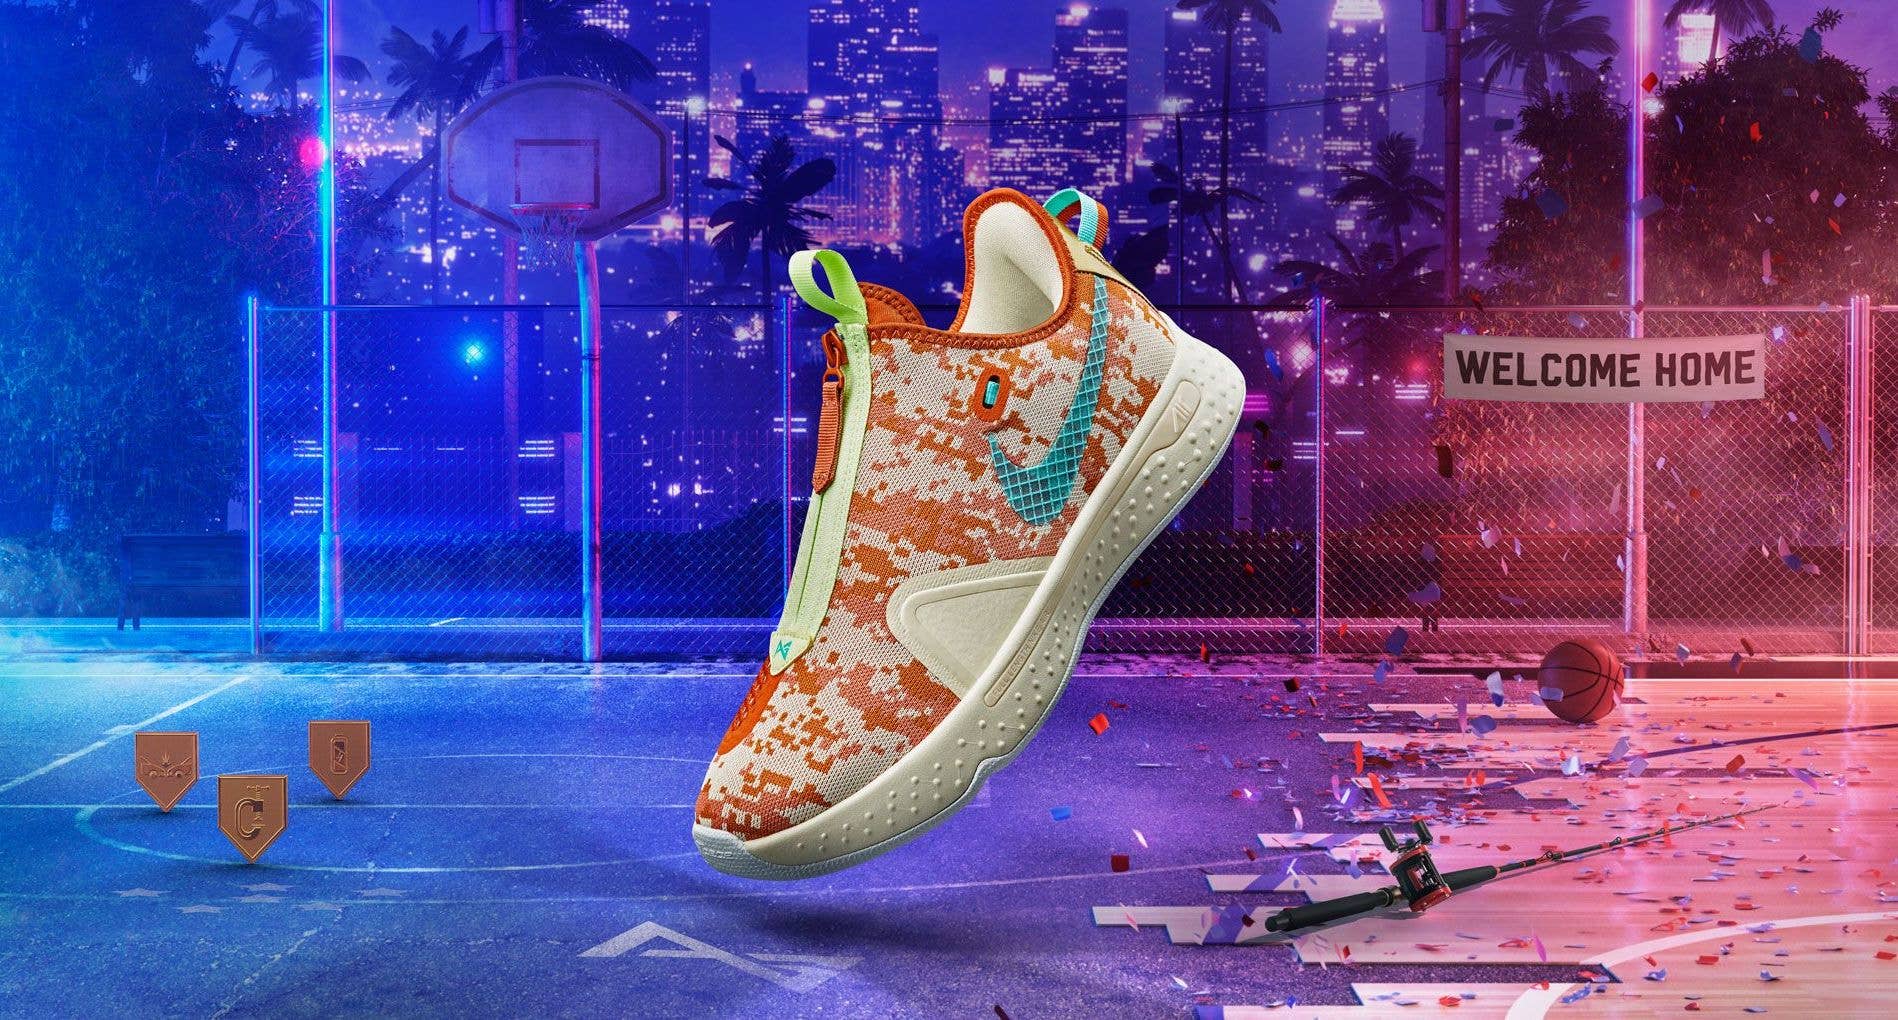 Did you know they had exclusive sneakers you can only buy at the event